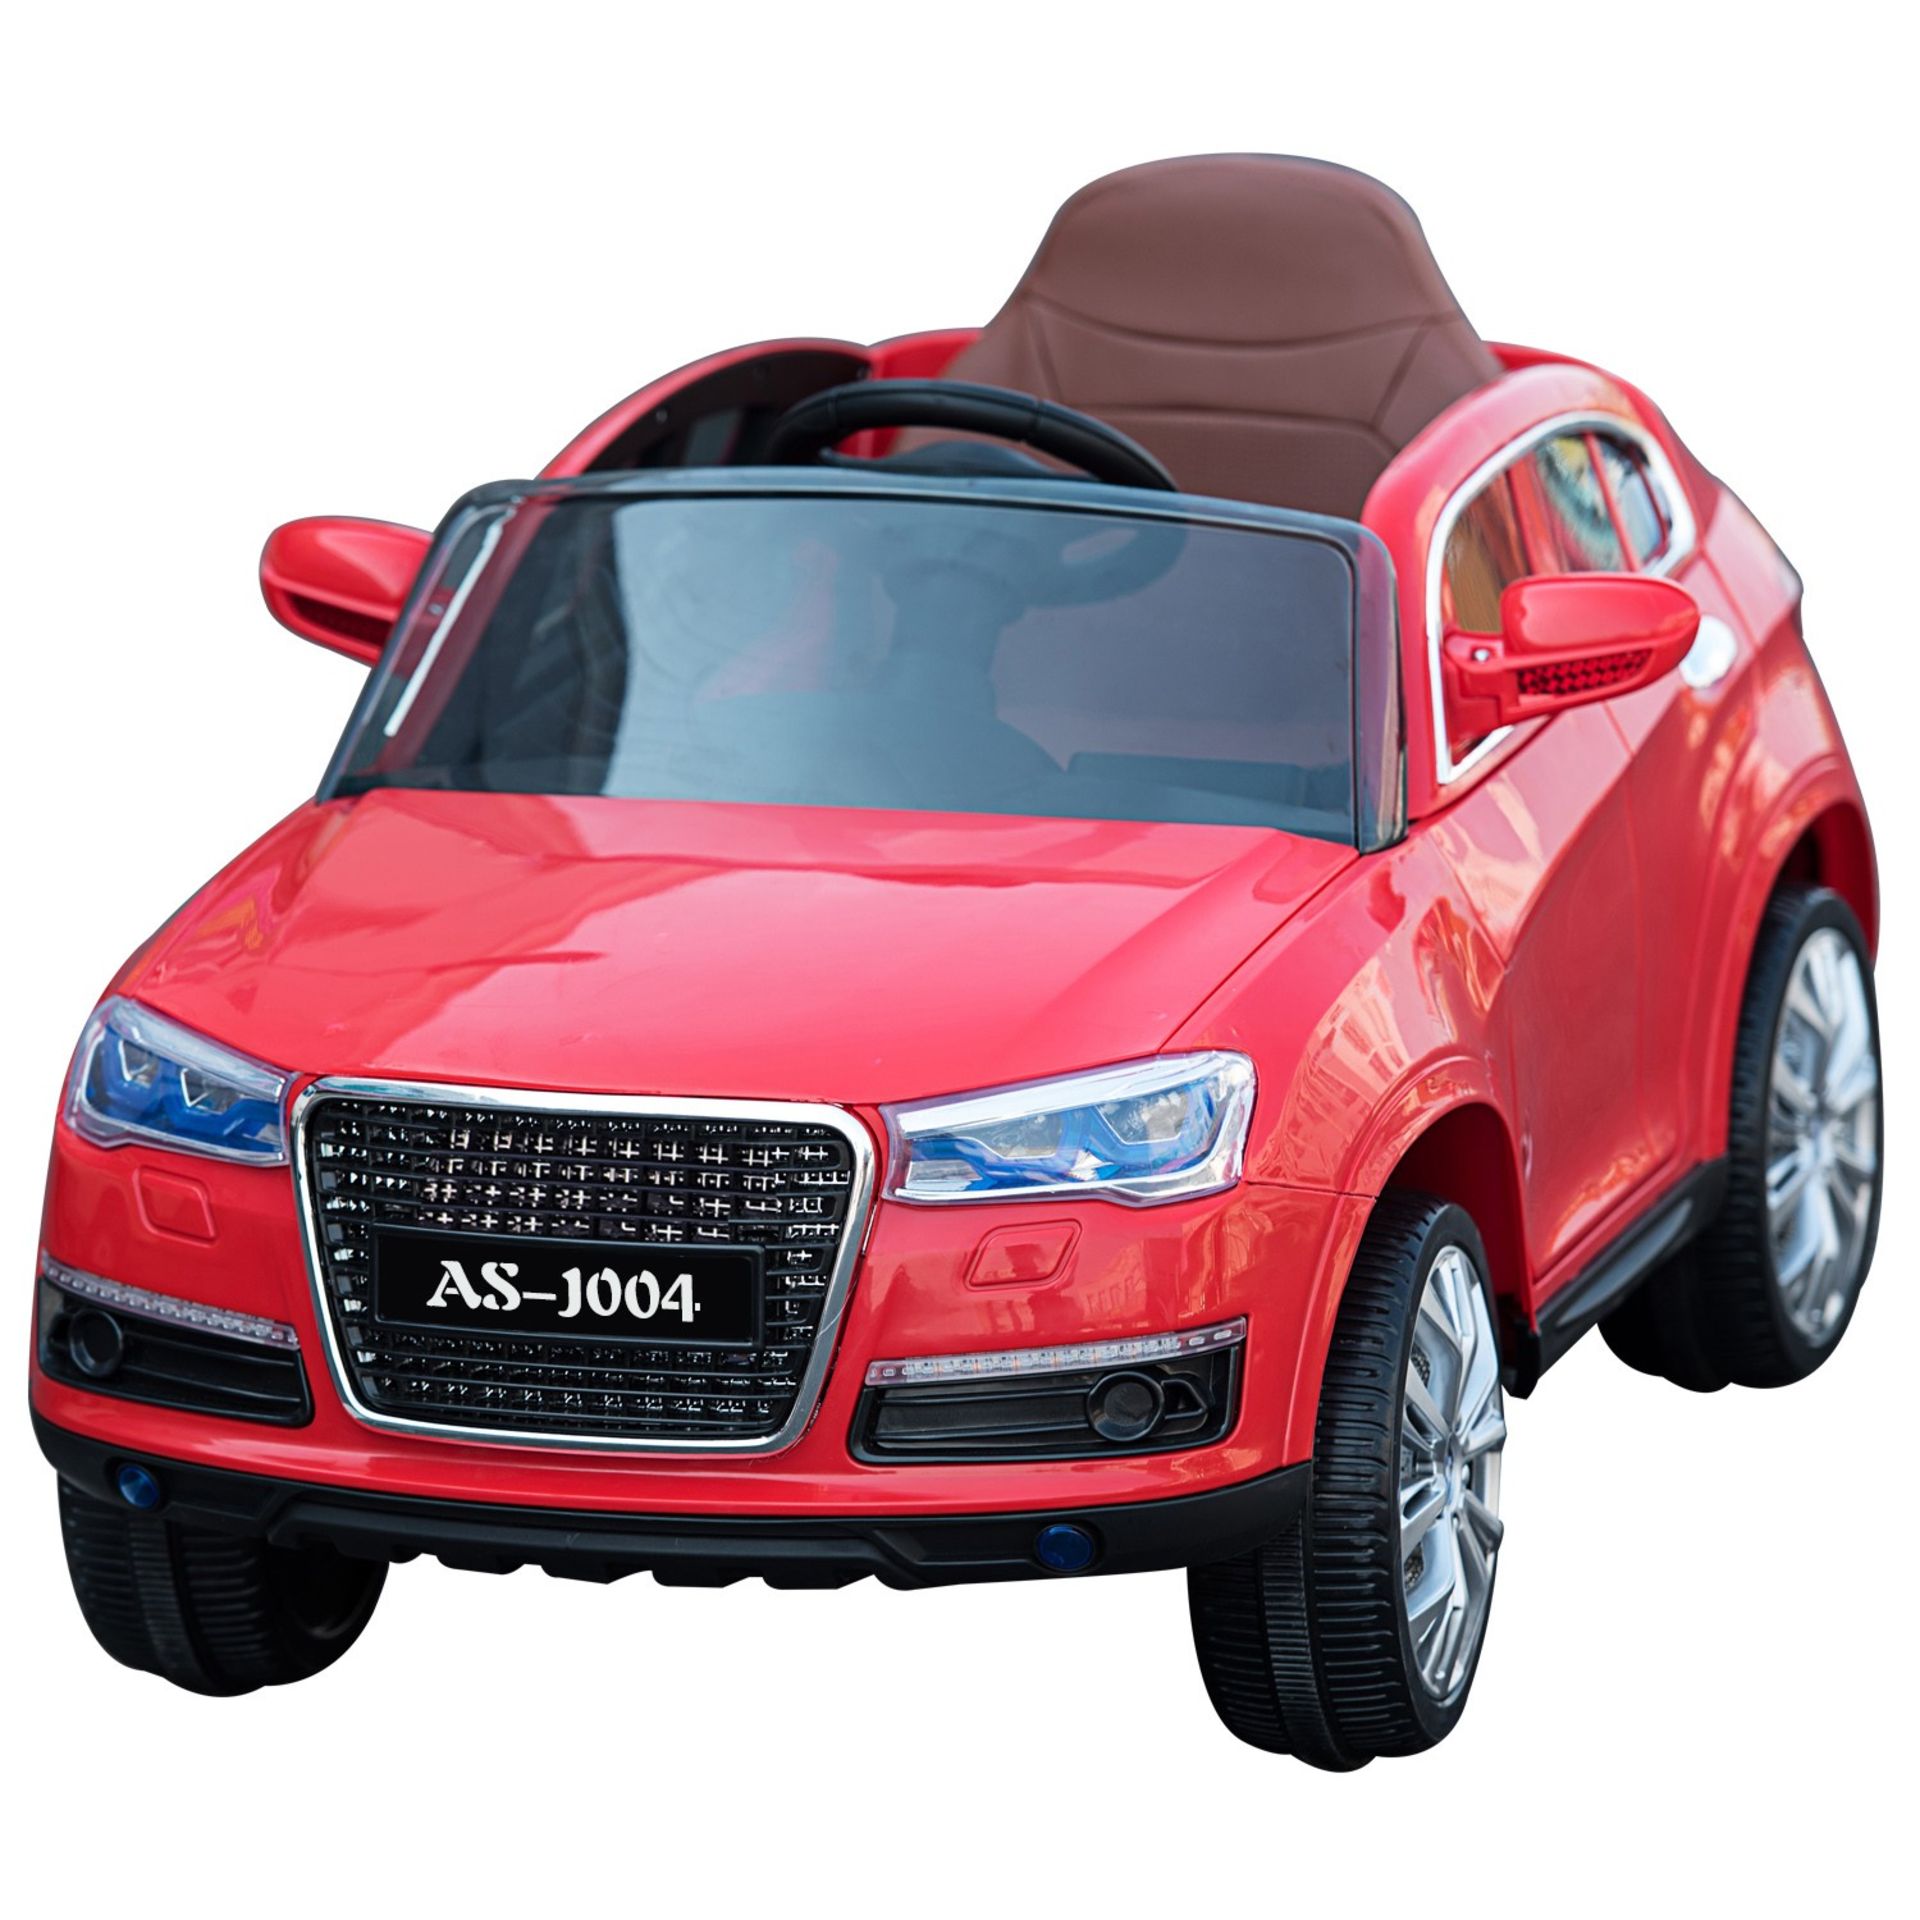 BRAND NEW BOXED AUDI STYLE CHILDRENS SIT AND RIDE CAR IN RED WITH REMOTE CONTROL, SAFETY BELT, TWO